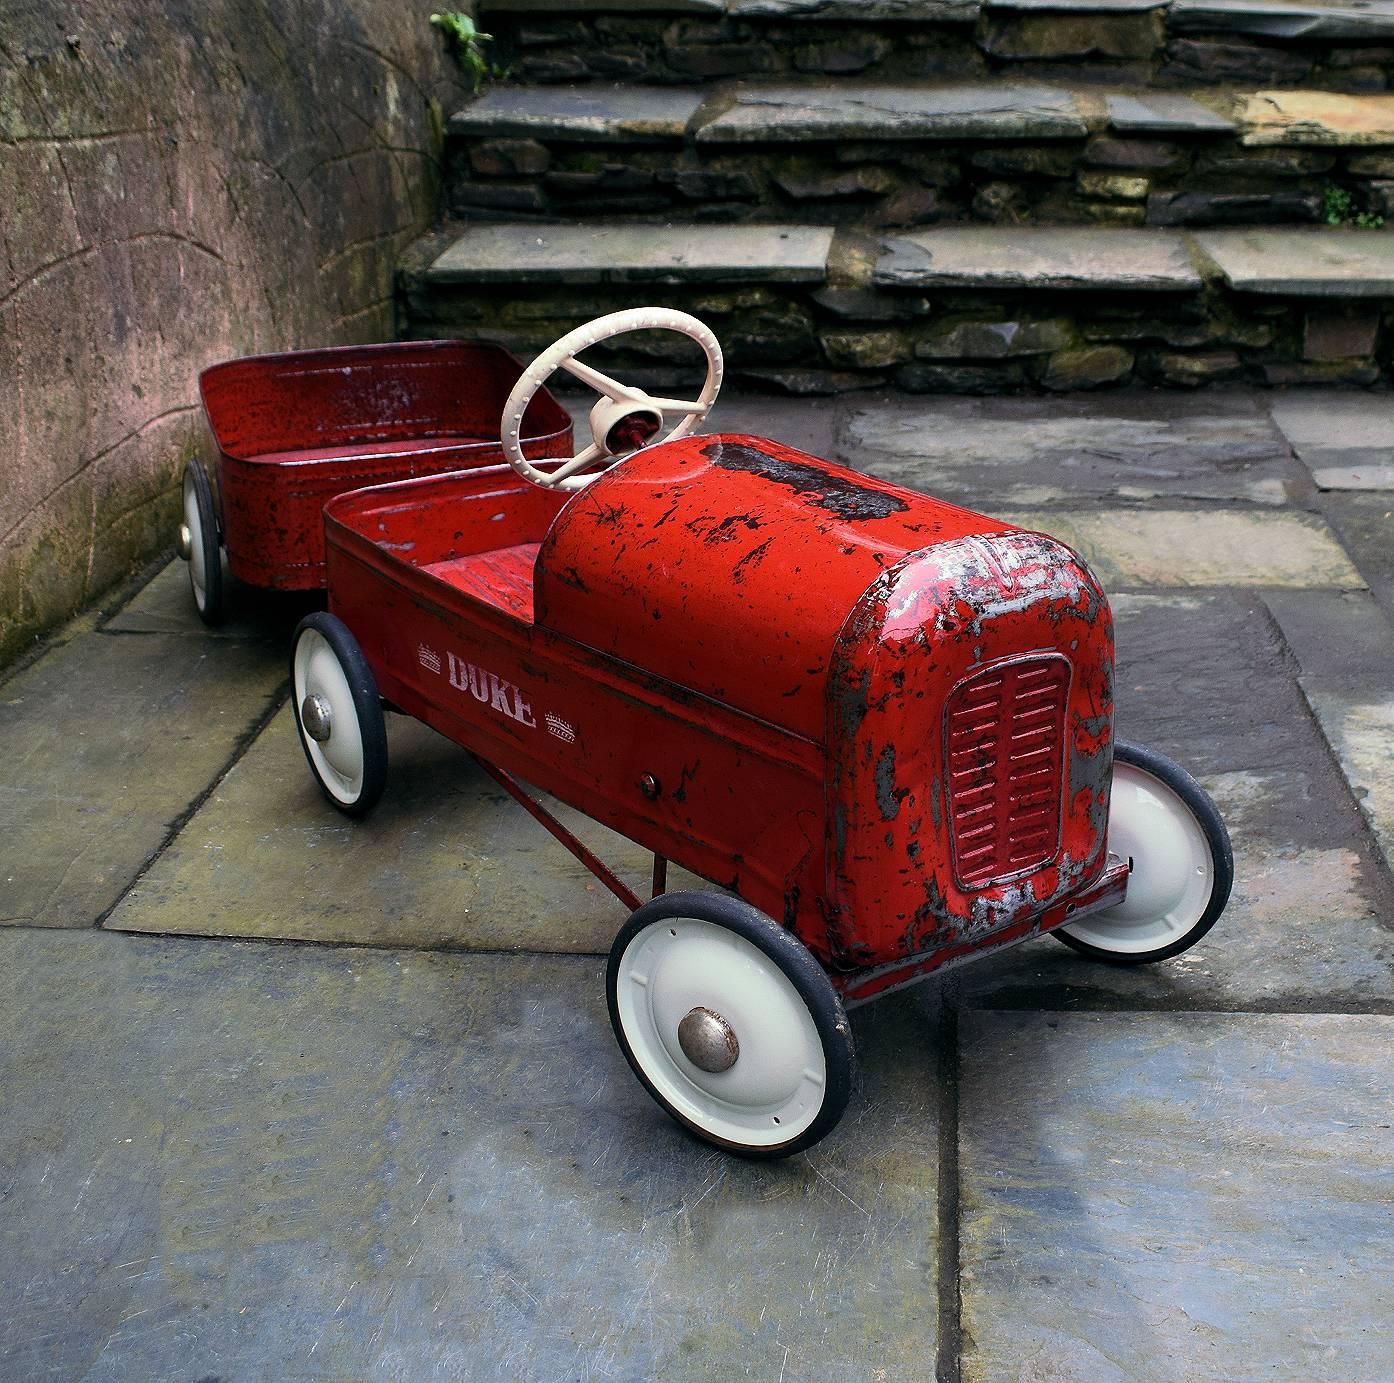 This is a wonderful opportunity to acquire Triang Duke pedal car, circa 1950 with a matching Triang Tri-Trailer, circa 1960. Totally authentic with original paint work and sign writing, right down to the chrome hub caps. Sympathetically restored and